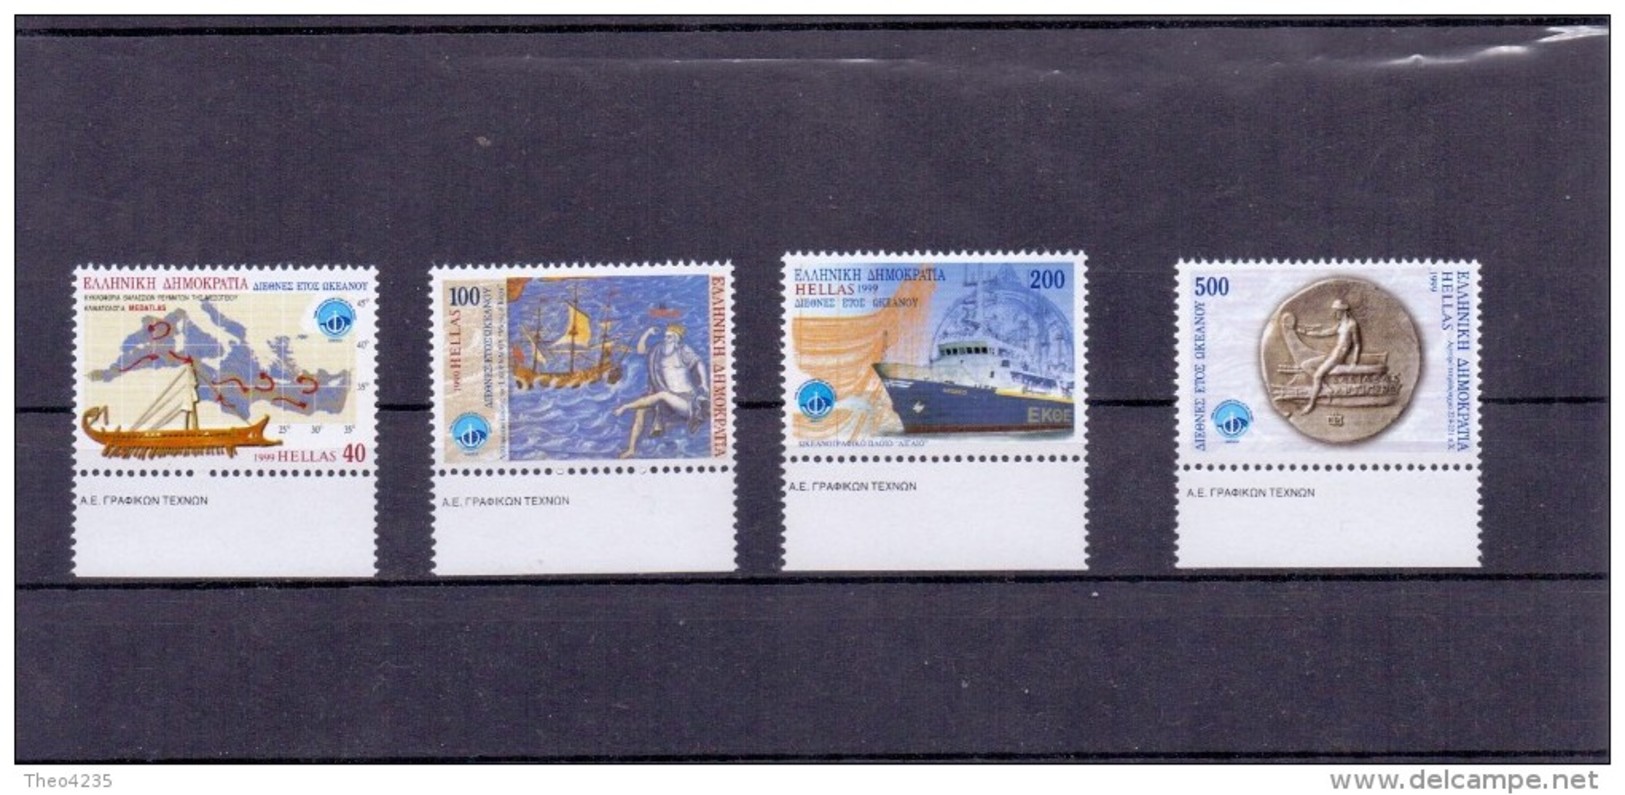 GREECE STAMPS INTERNATIONAL YEAR OF THE OCEAN -19/2/99-MNH - Unused Stamps